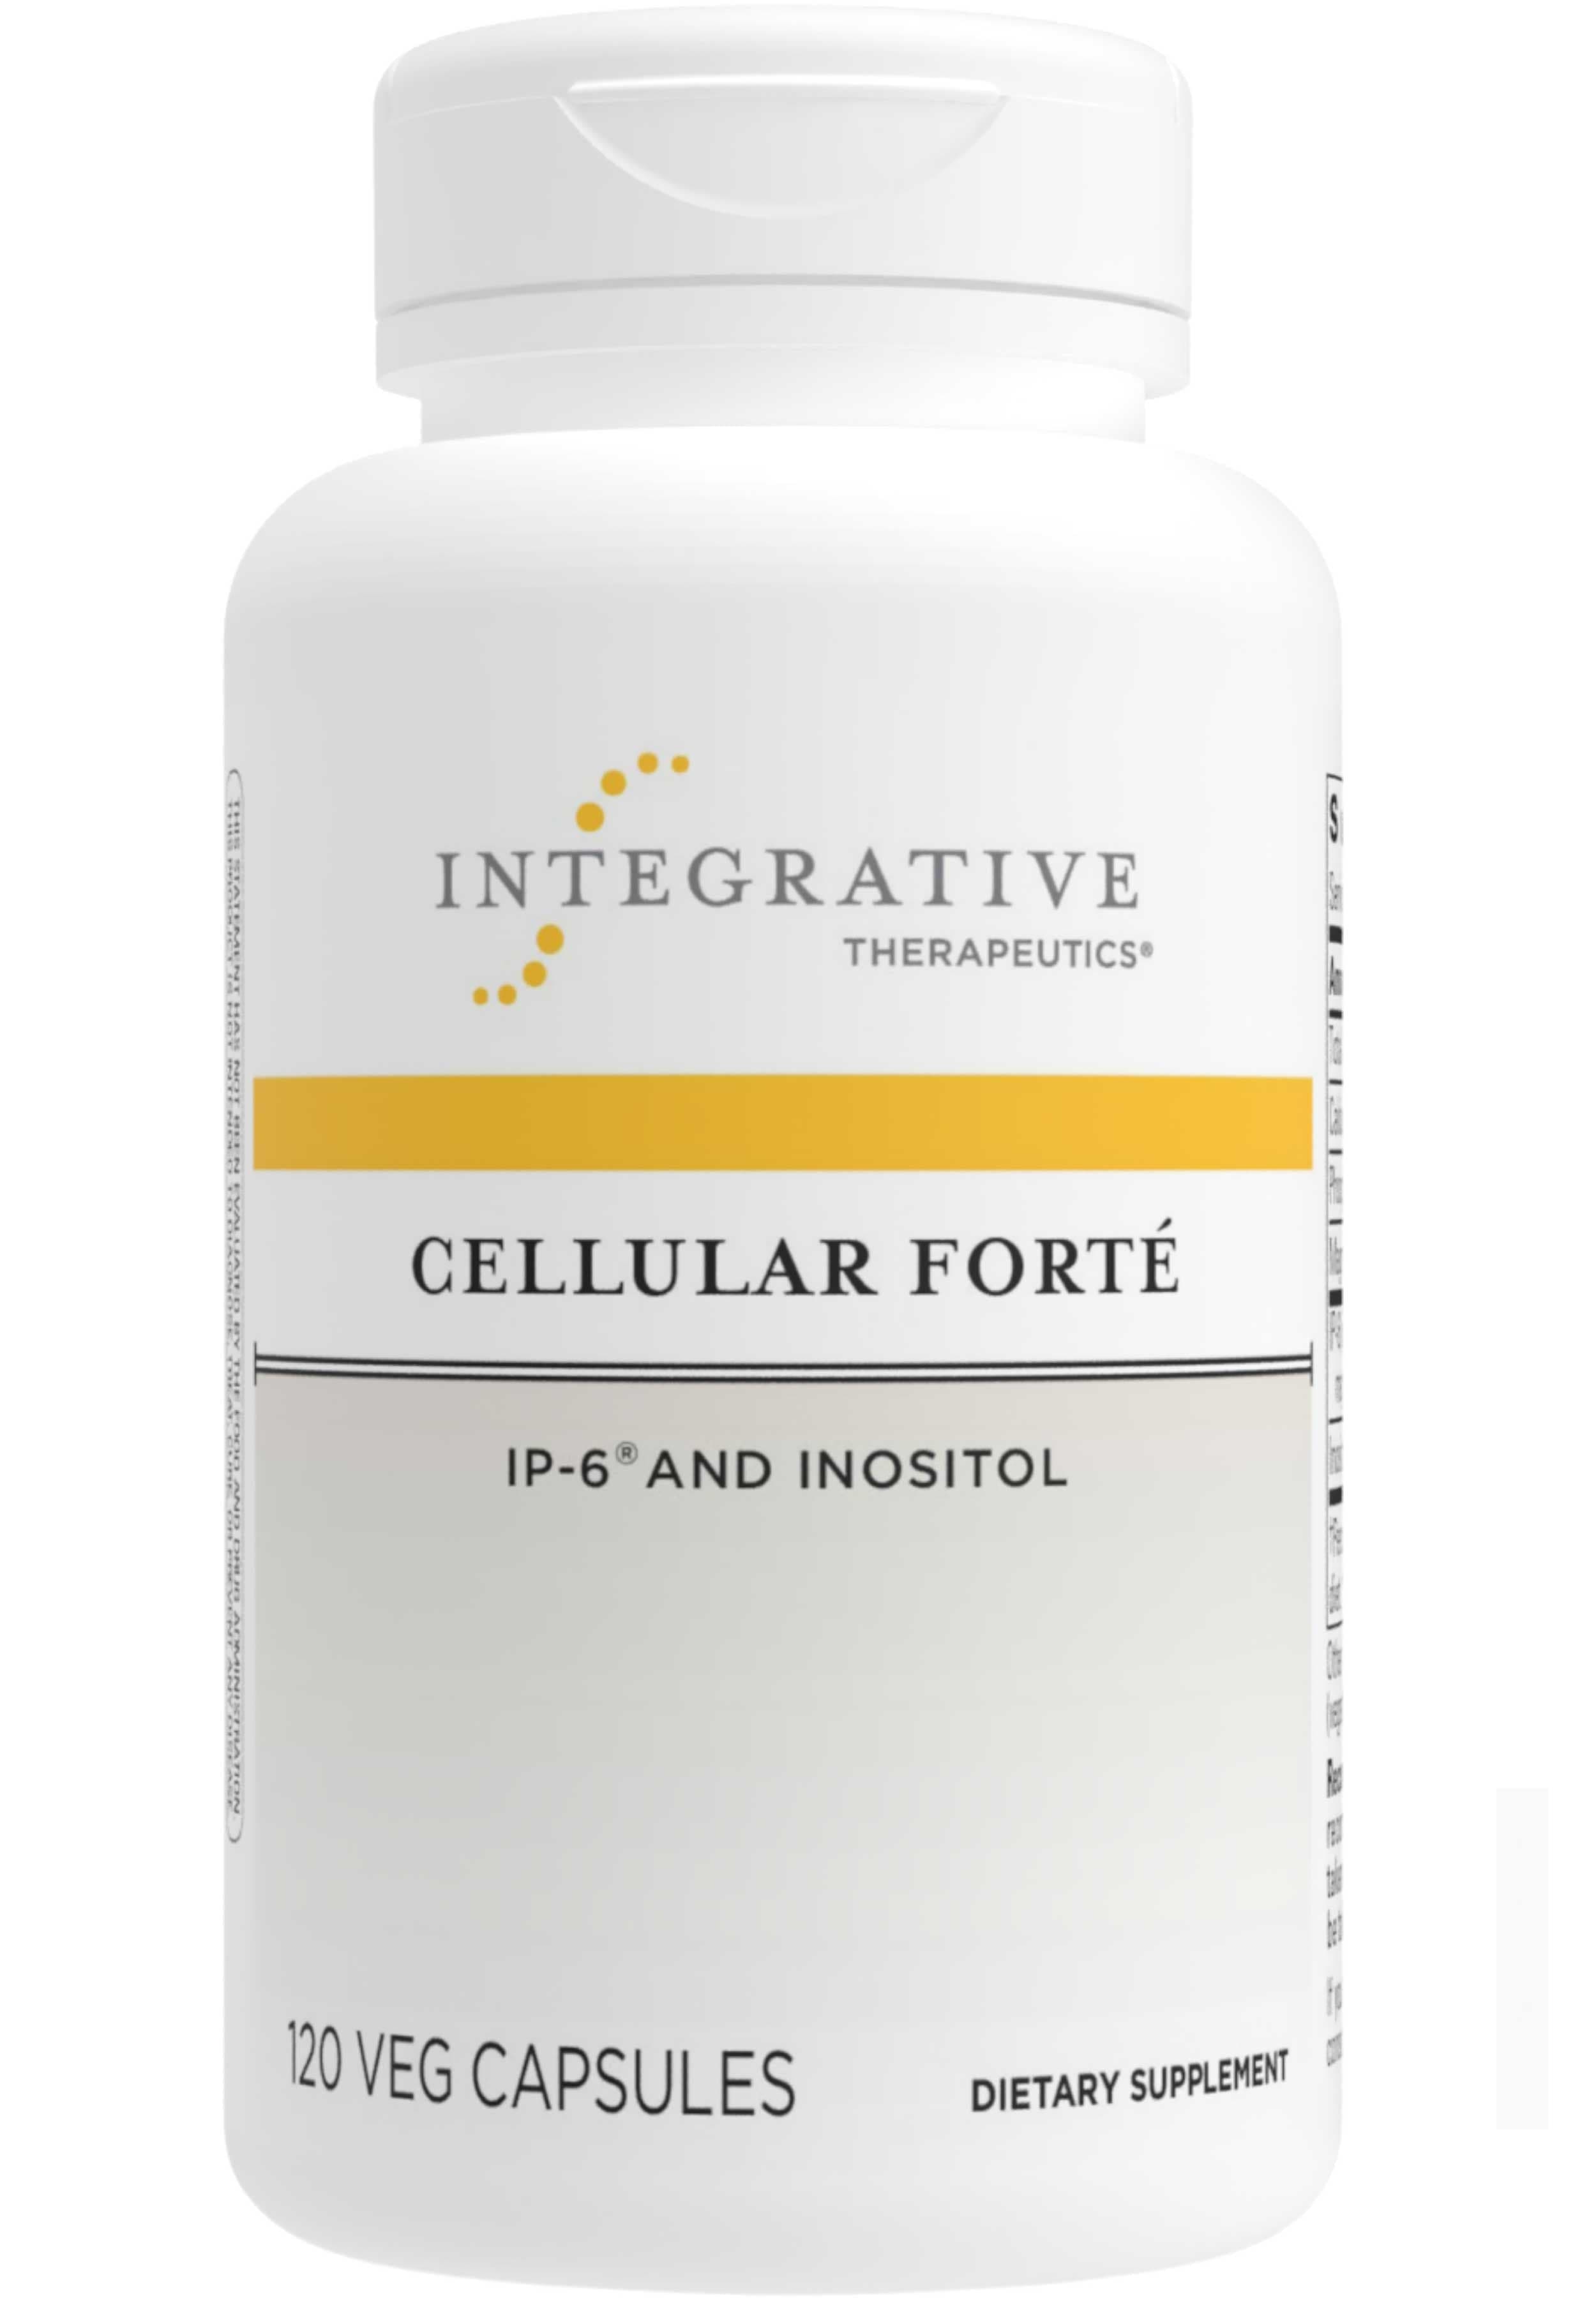 Integrative Therapeutics Cellular Forte with IP-6 and Inositol